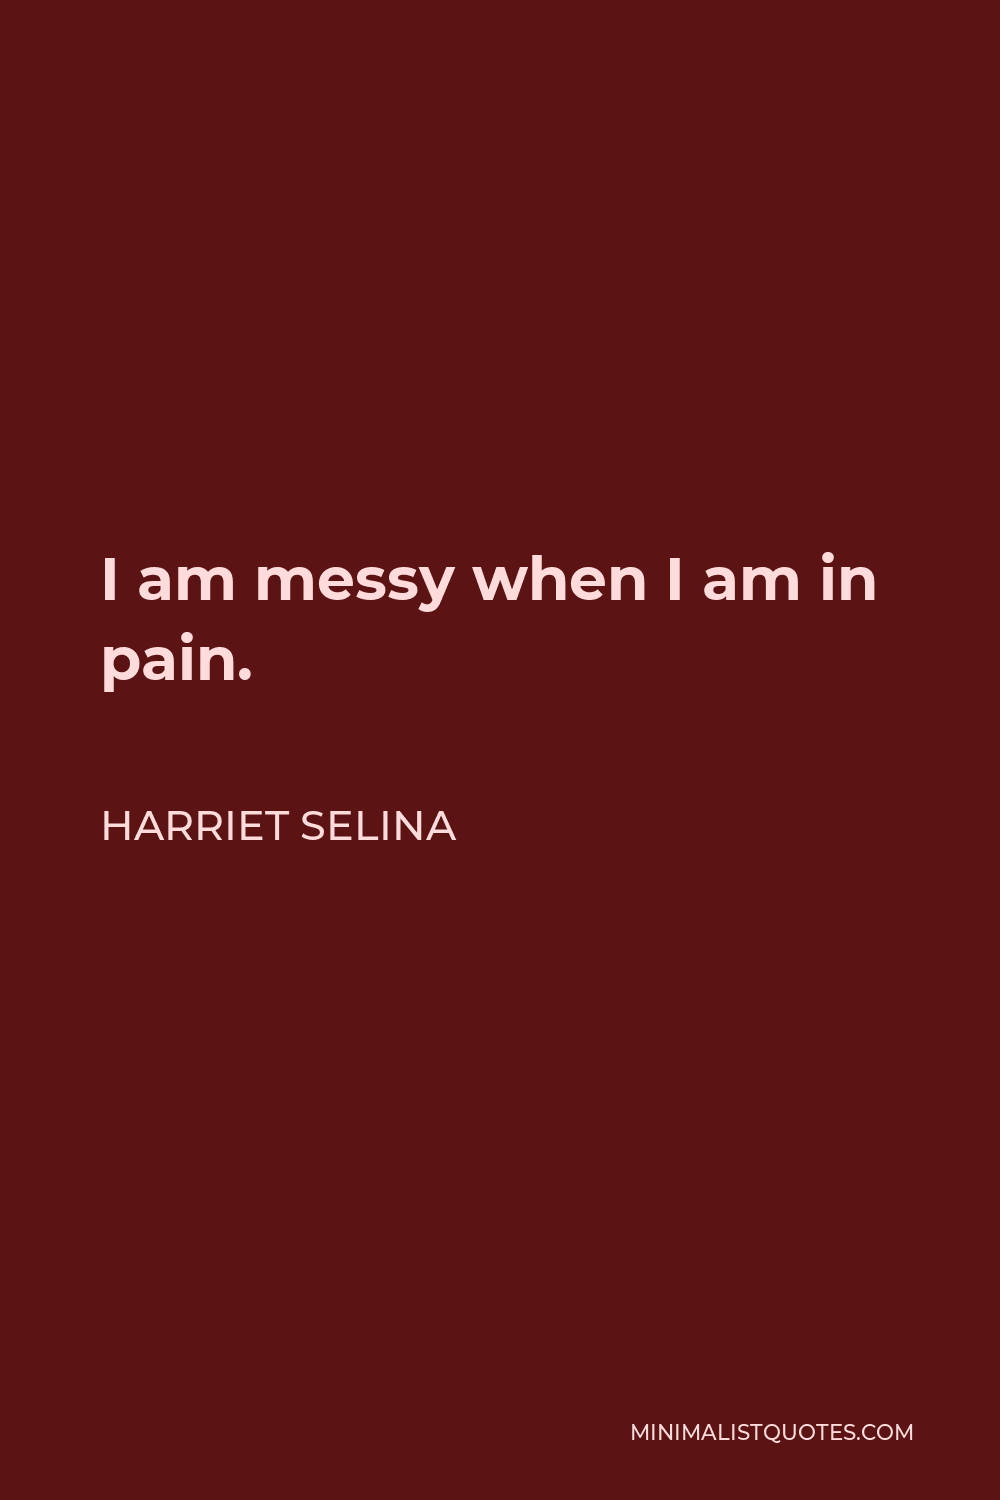 Harriet Selina Quote - I am messy when I am in pain.